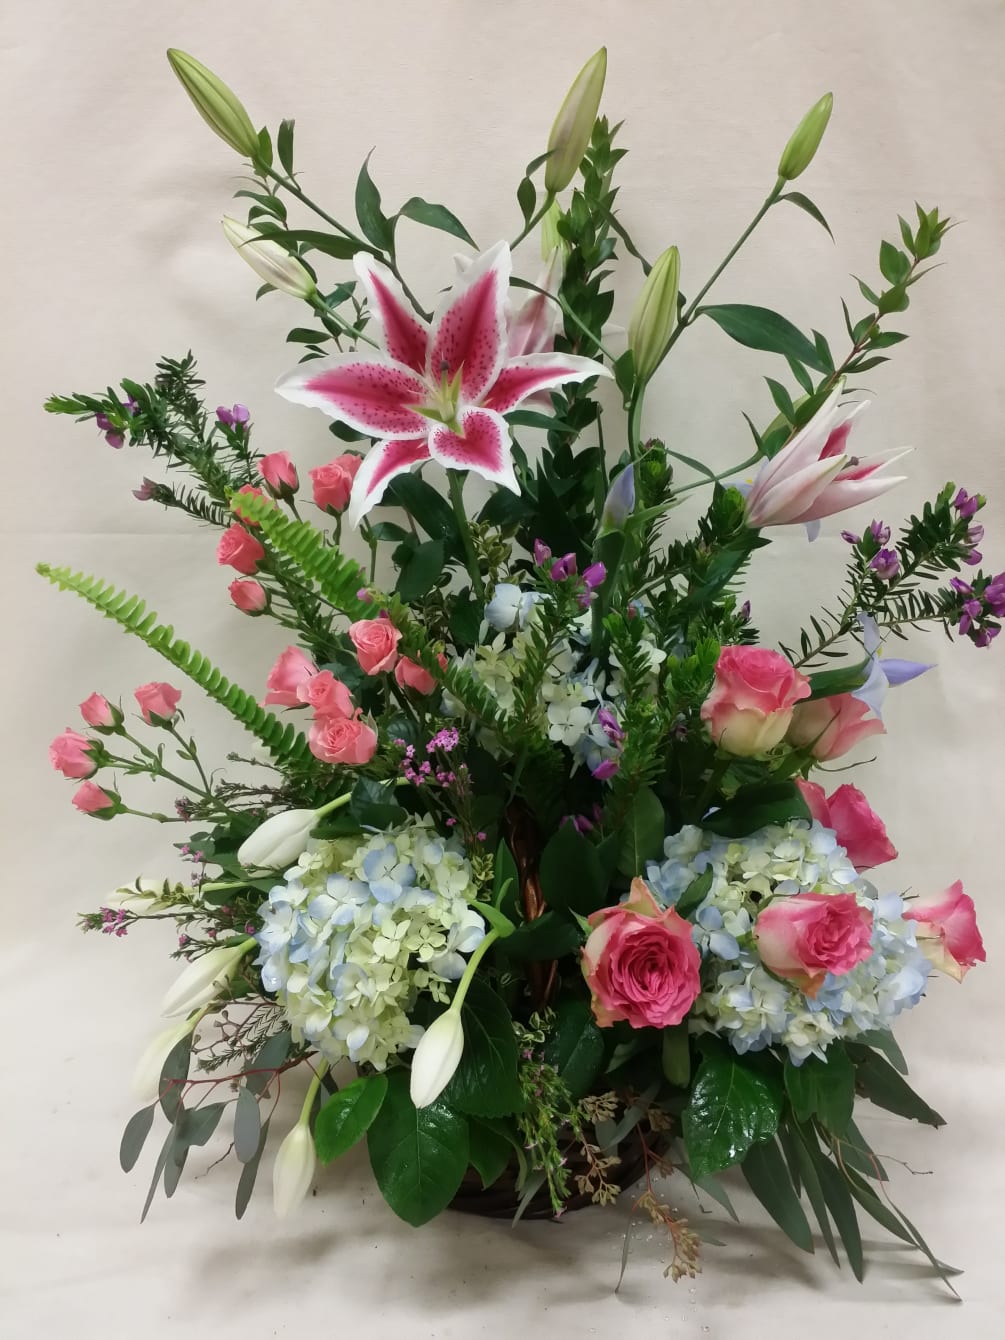 Stargazer lilies, blue hydrangea, and pink roses all displayed in a very